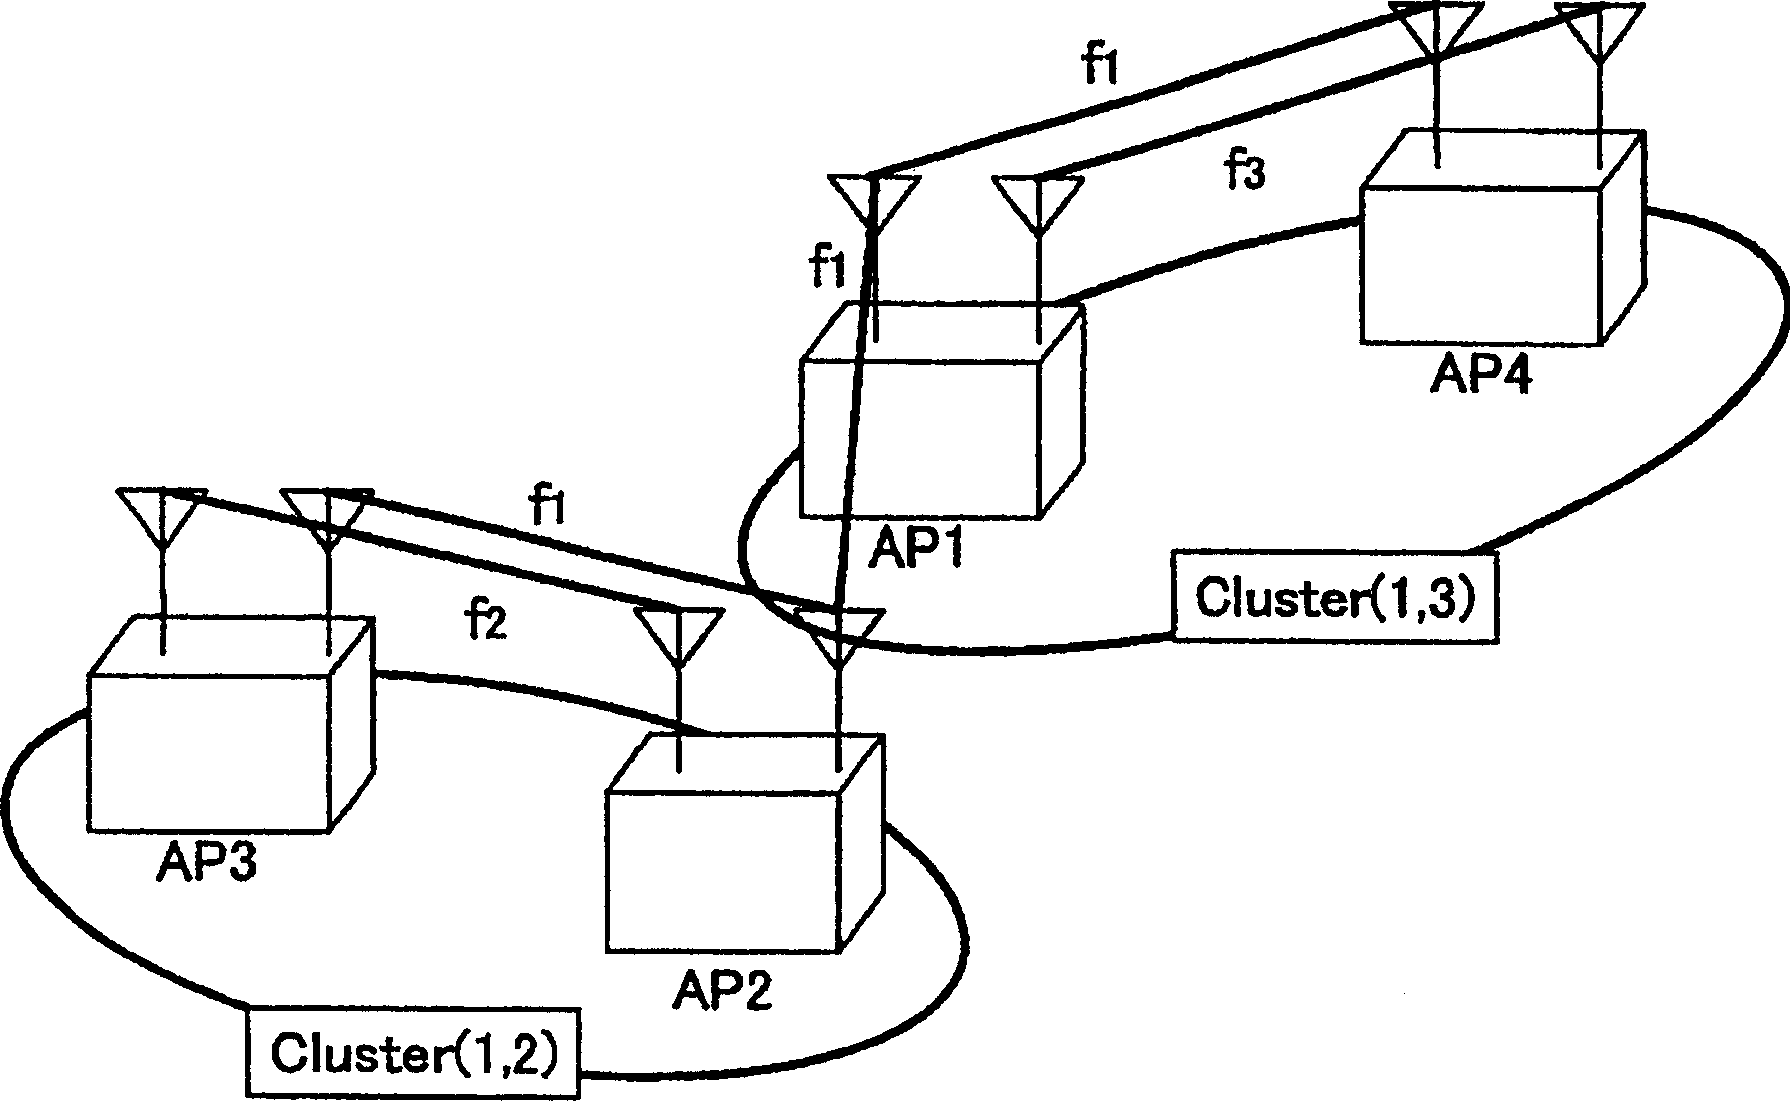 Channel allocation method